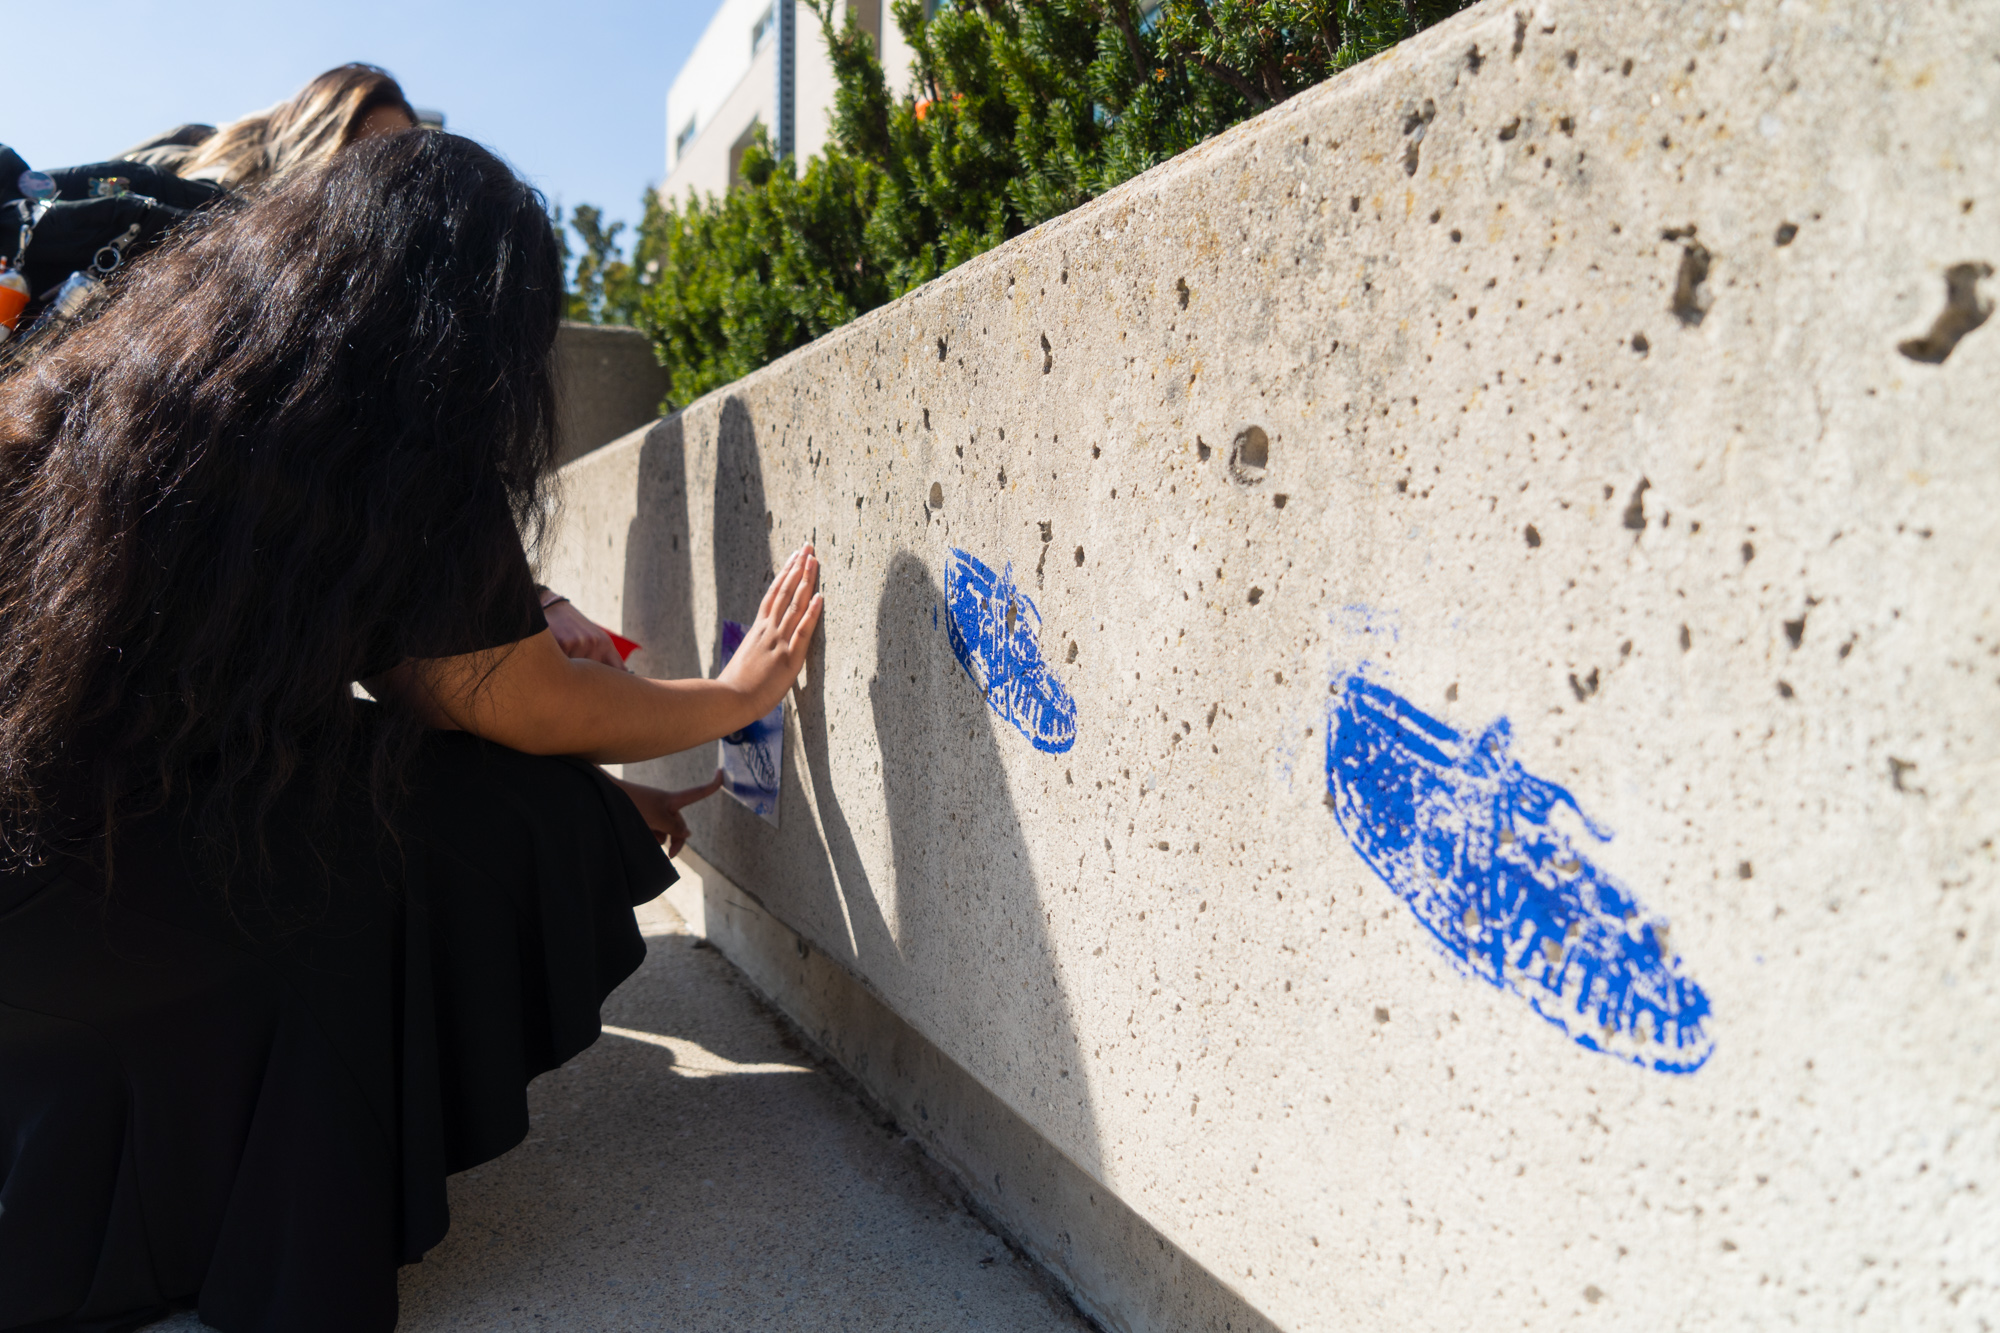 A group of students are adding a third moccasin stencil onto a concrete wall while the first two painted stencils are in the foreground